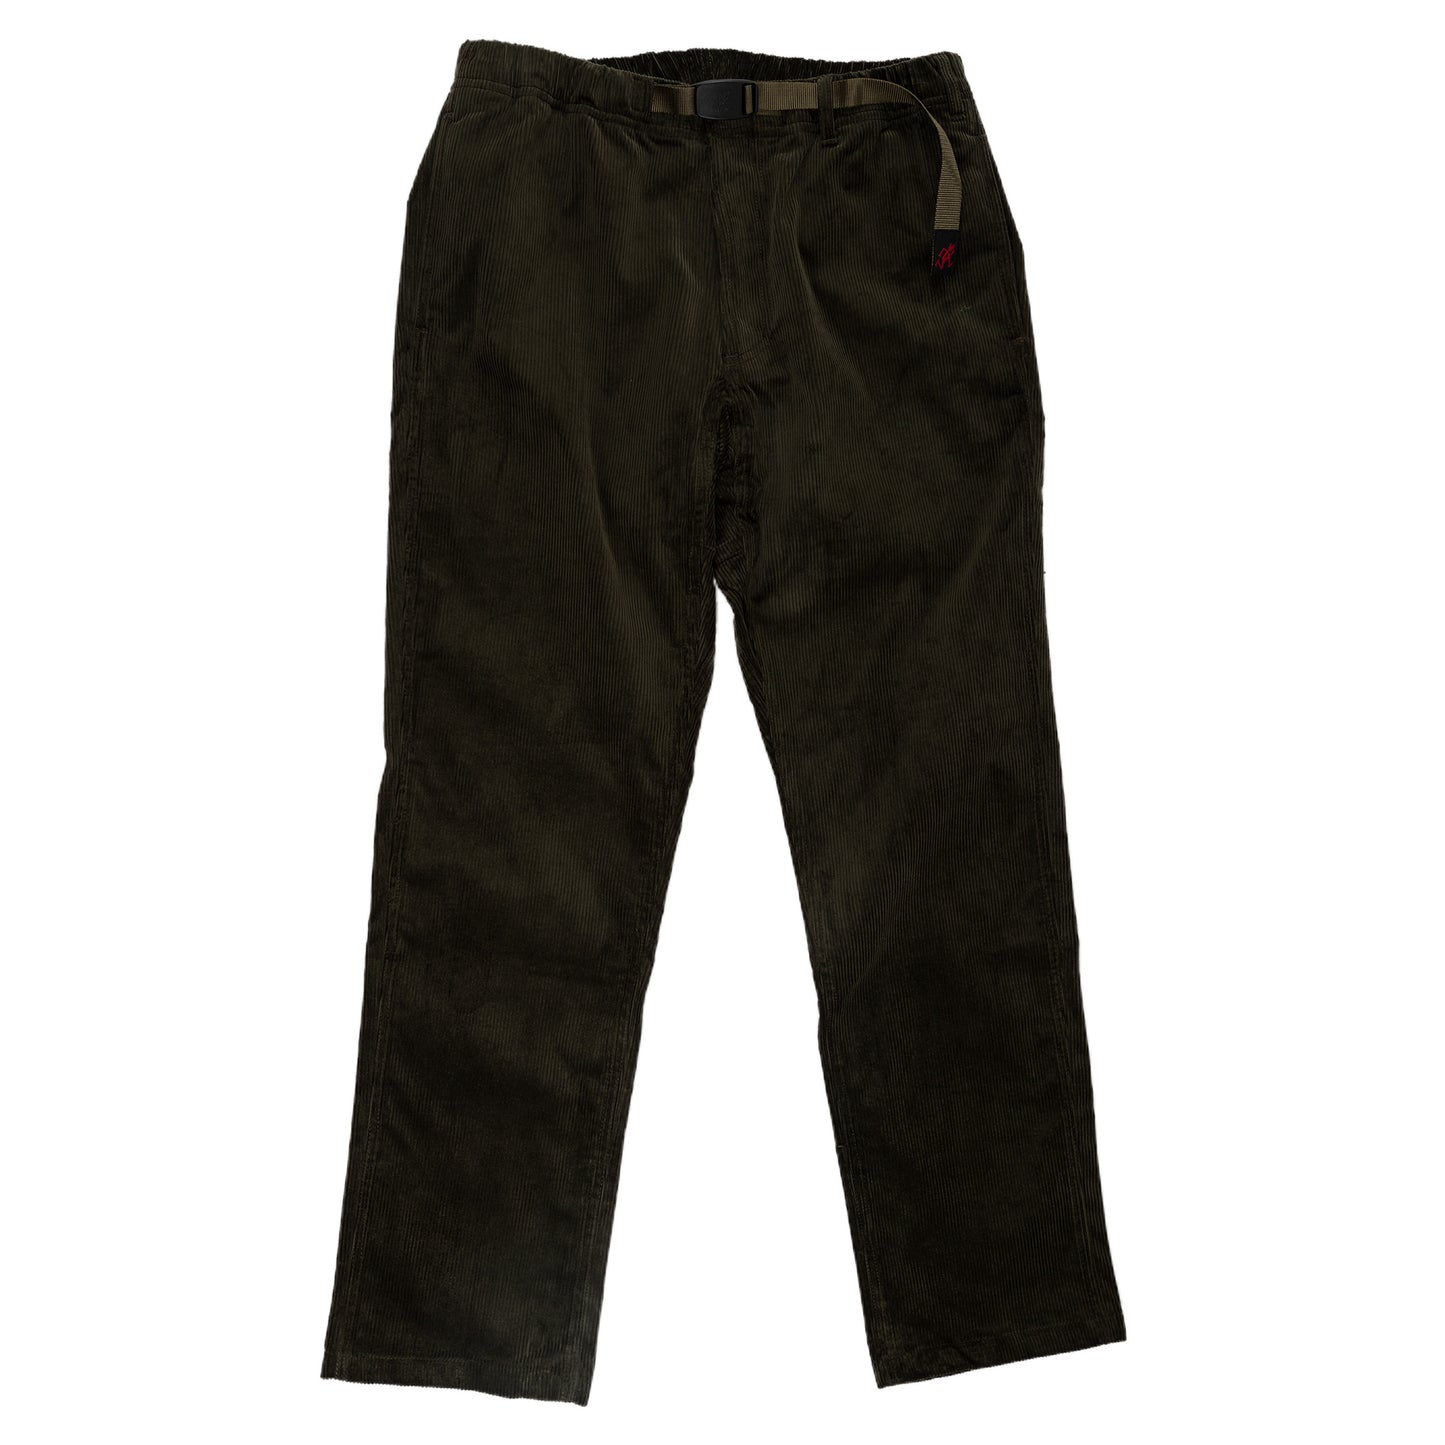 Gramicci Corduroy NN Pants Just Cut in Olive front